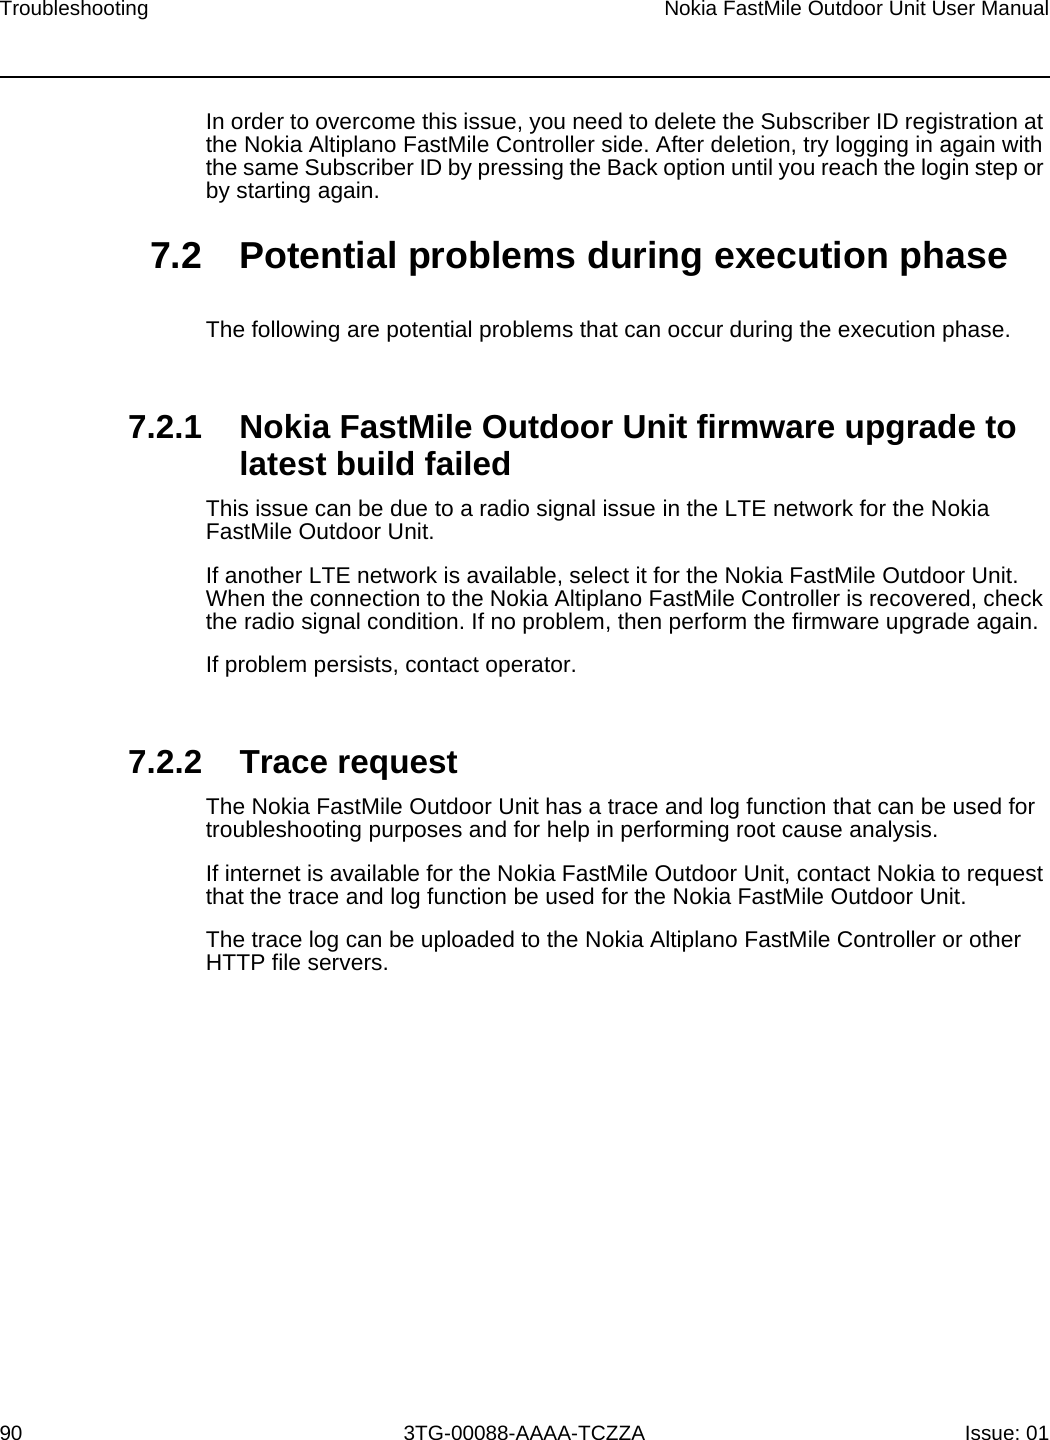 Troubleshooting90Nokia FastMile Outdoor Unit User Manual3TG-00088-AAAA-TCZZA Issue: 01In order to overcome this issue, you need to delete the Subscriber ID registration at the Nokia Altiplano FastMile Controller side. After deletion, try logging in again with the same Subscriber ID by pressing the Back option until you reach the login step or by starting again. 7.2 Potential problems during execution phaseThe following are potential problems that can occur during the execution phase.7.2.1 Nokia FastMile Outdoor Unit firmware upgrade to latest build failedThis issue can be due to a radio signal issue in the LTE network for the Nokia FastMile Outdoor Unit.If another LTE network is available, select it for the Nokia FastMile Outdoor Unit. When the connection to the Nokia Altiplano FastMile Controller is recovered, check the radio signal condition. If no problem, then perform the firmware upgrade again. If problem persists, contact operator.7.2.2 Trace requestThe Nokia FastMile Outdoor Unit has a trace and log function that can be used for troubleshooting purposes and for help in performing root cause analysis. If internet is available for the Nokia FastMile Outdoor Unit, contact Nokia to request that the trace and log function be used for the Nokia FastMile Outdoor Unit. The trace log can be uploaded to the Nokia Altiplano FastMile Controller or other HTTP file servers.